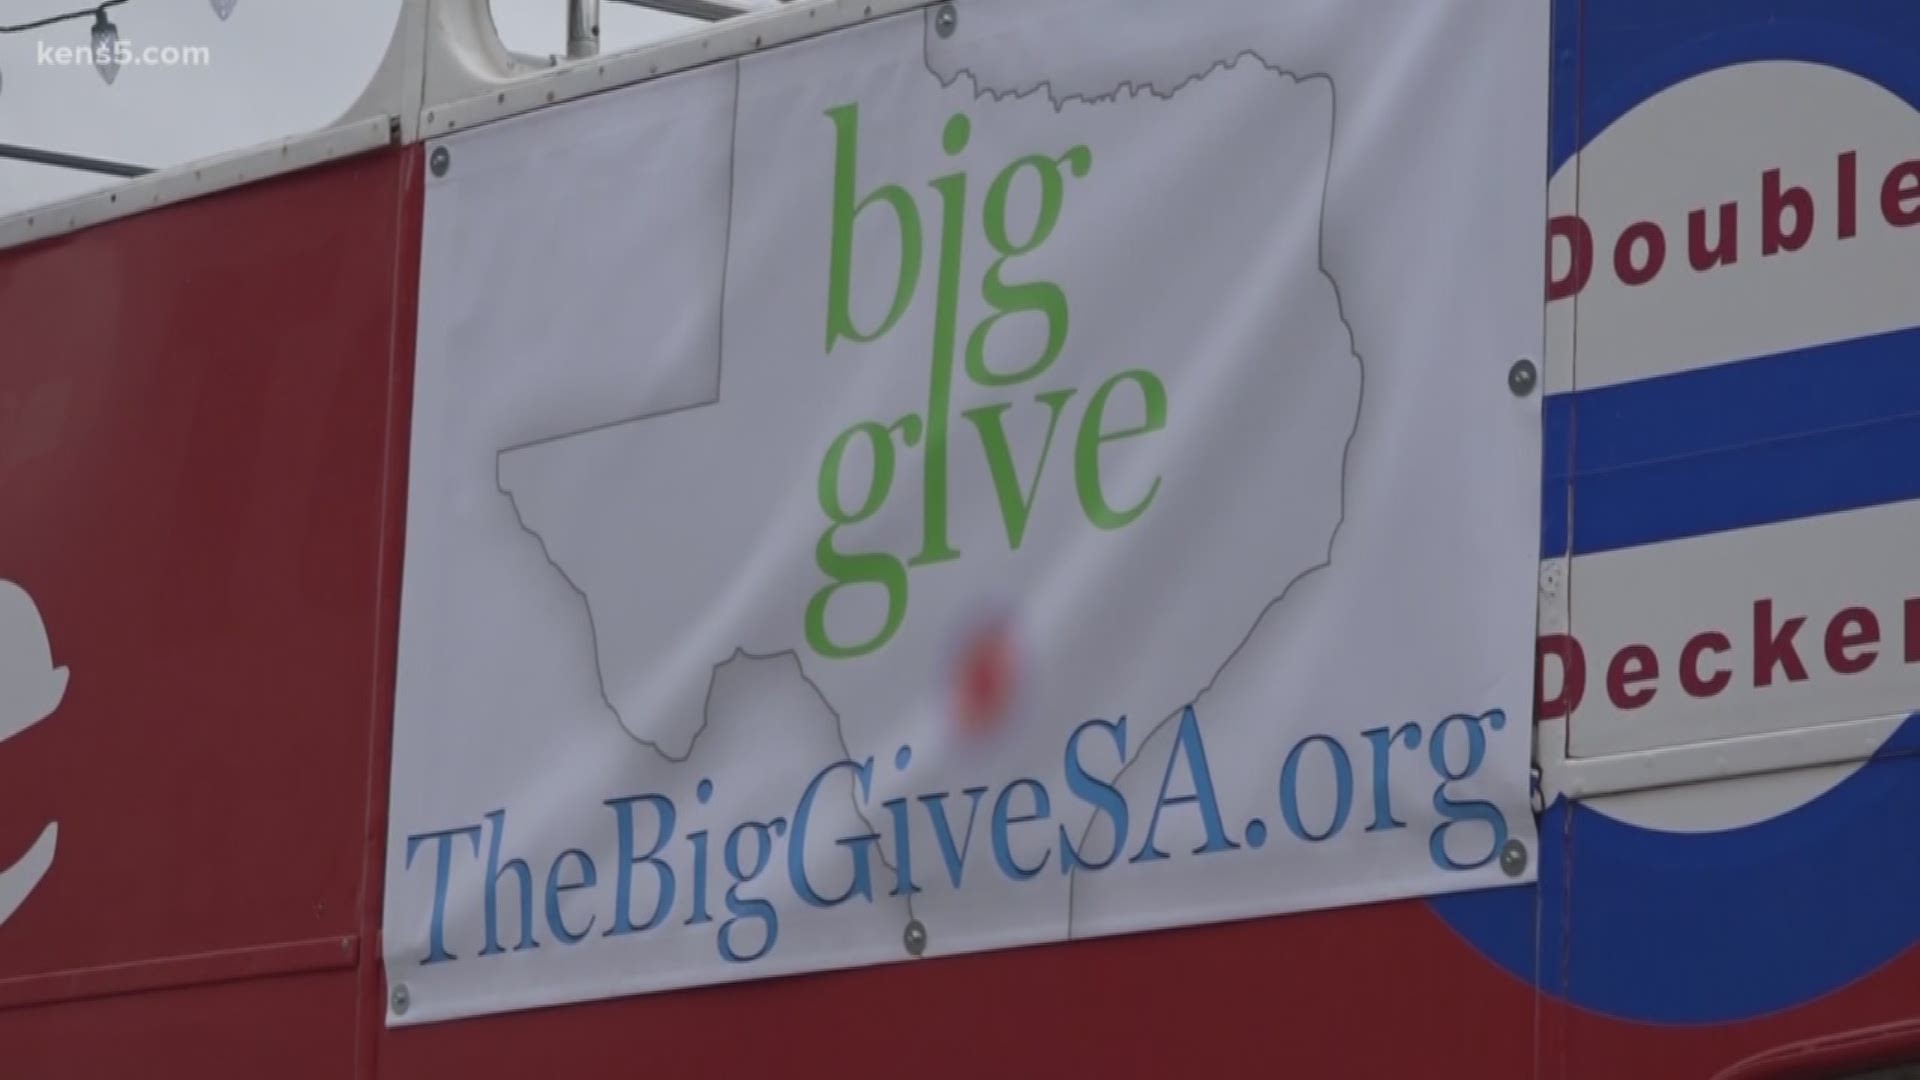 Big Give organizers hope to rise $7 million for non-profits during the fifth annual fundraiser.